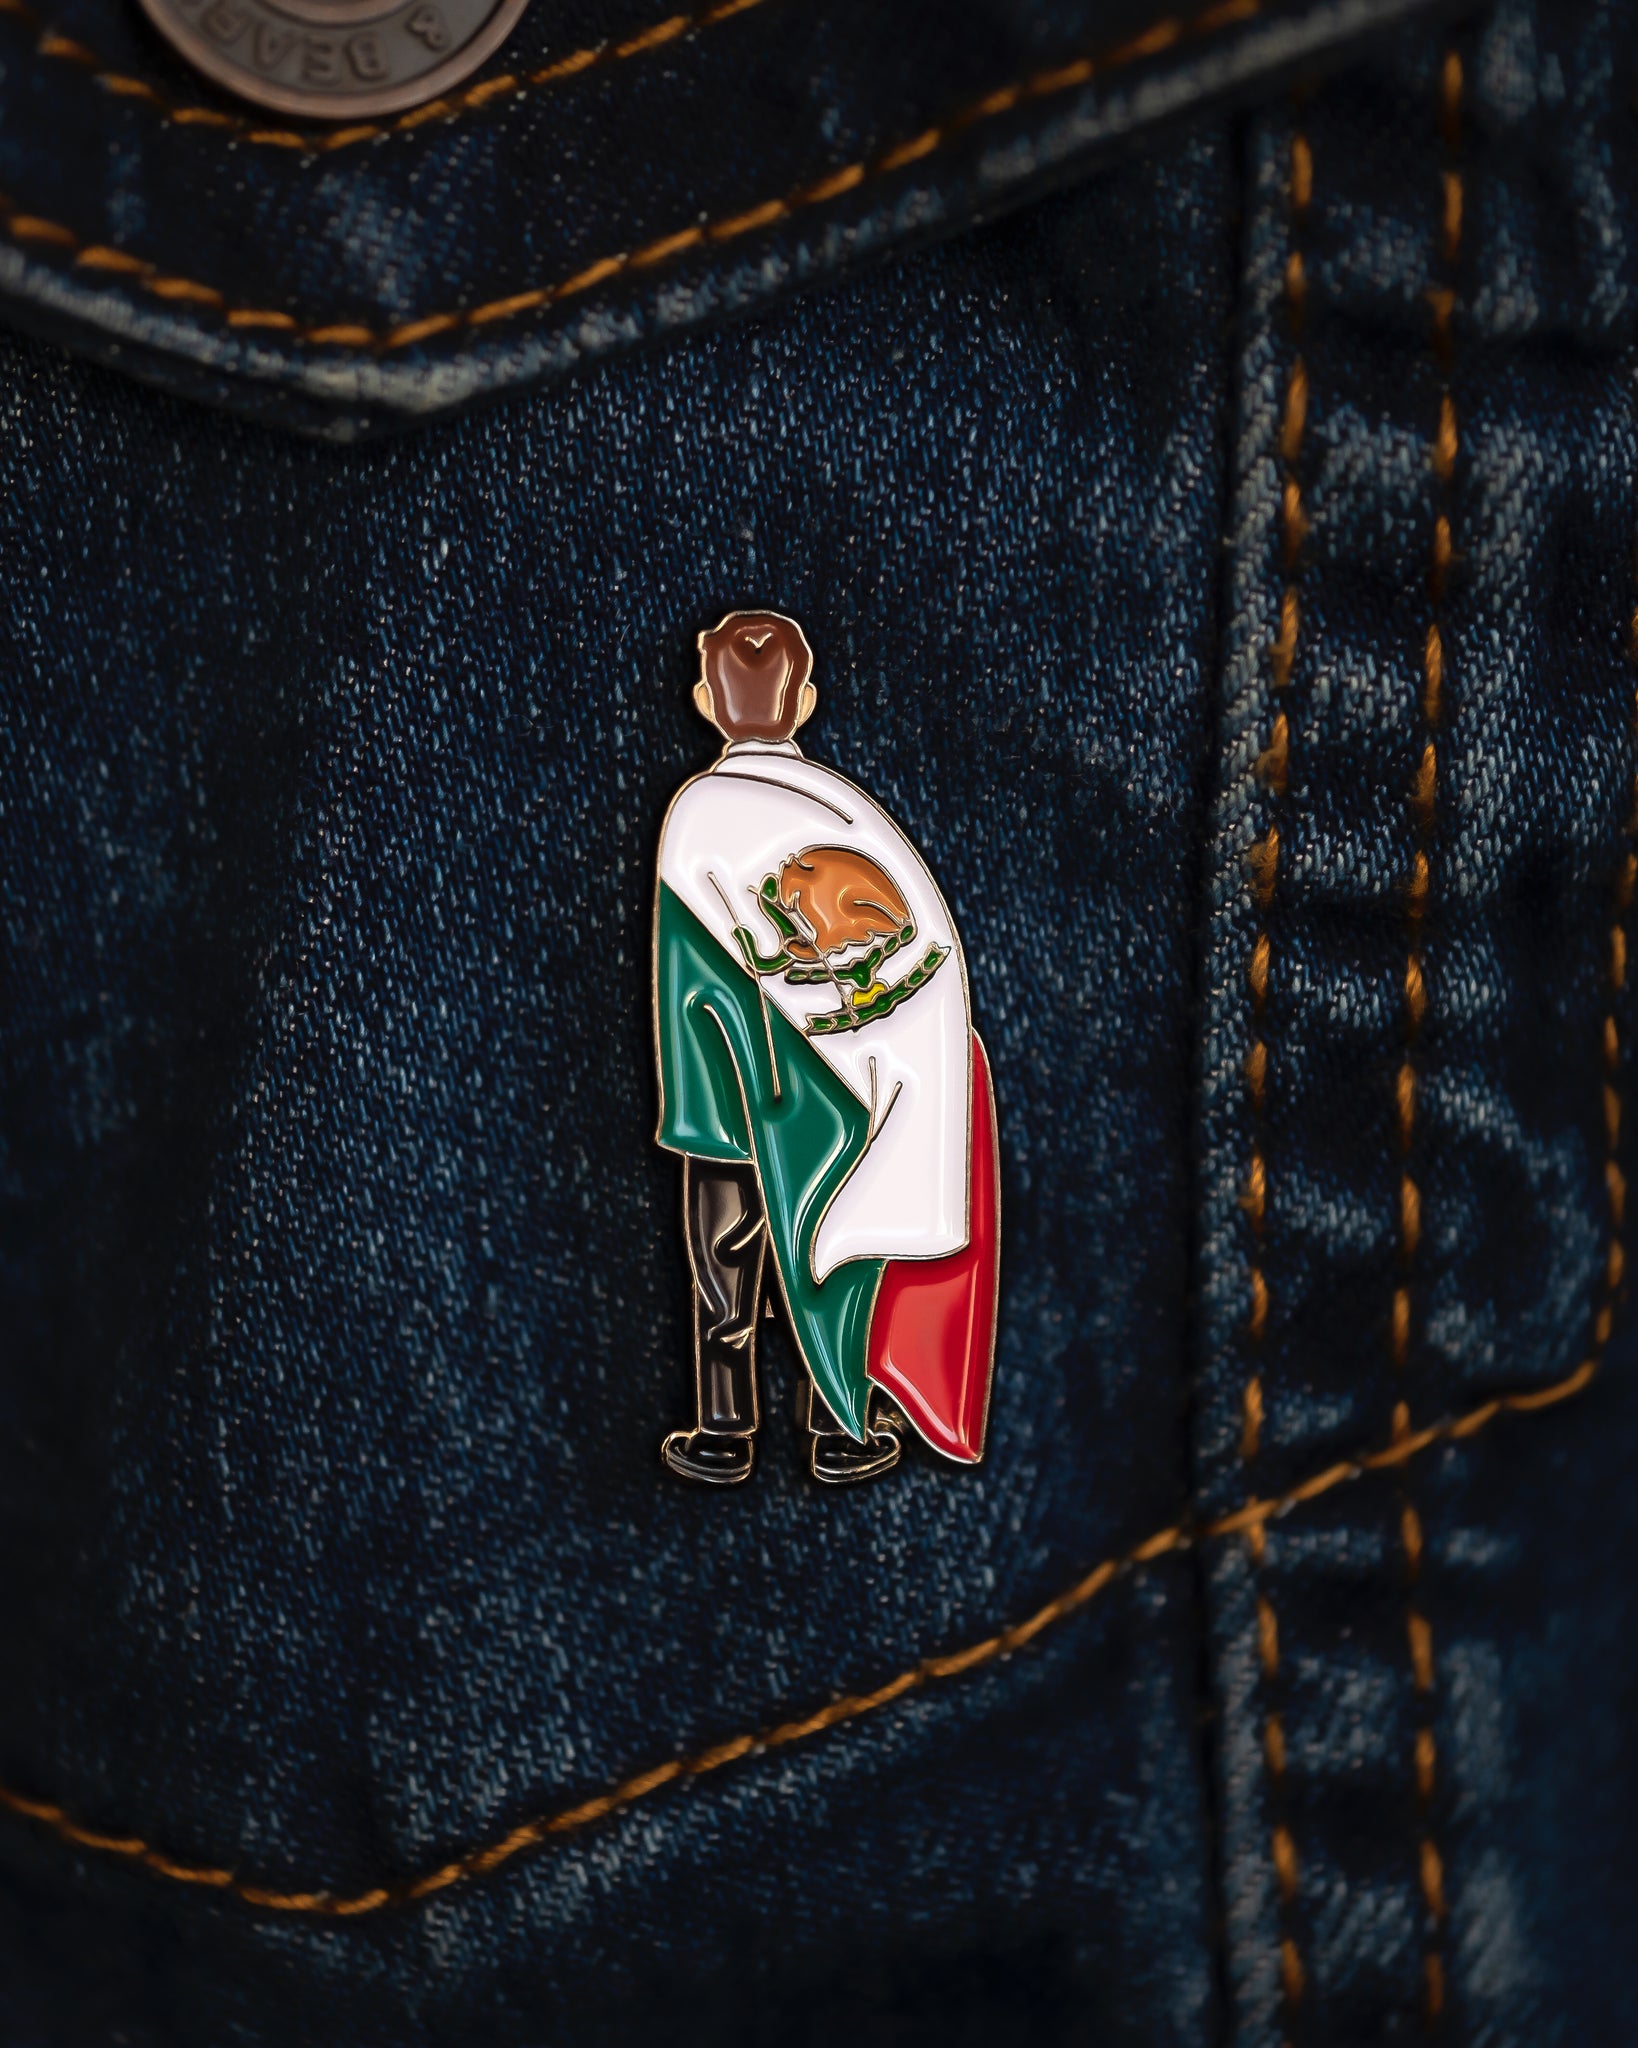 MEX I CAN pin